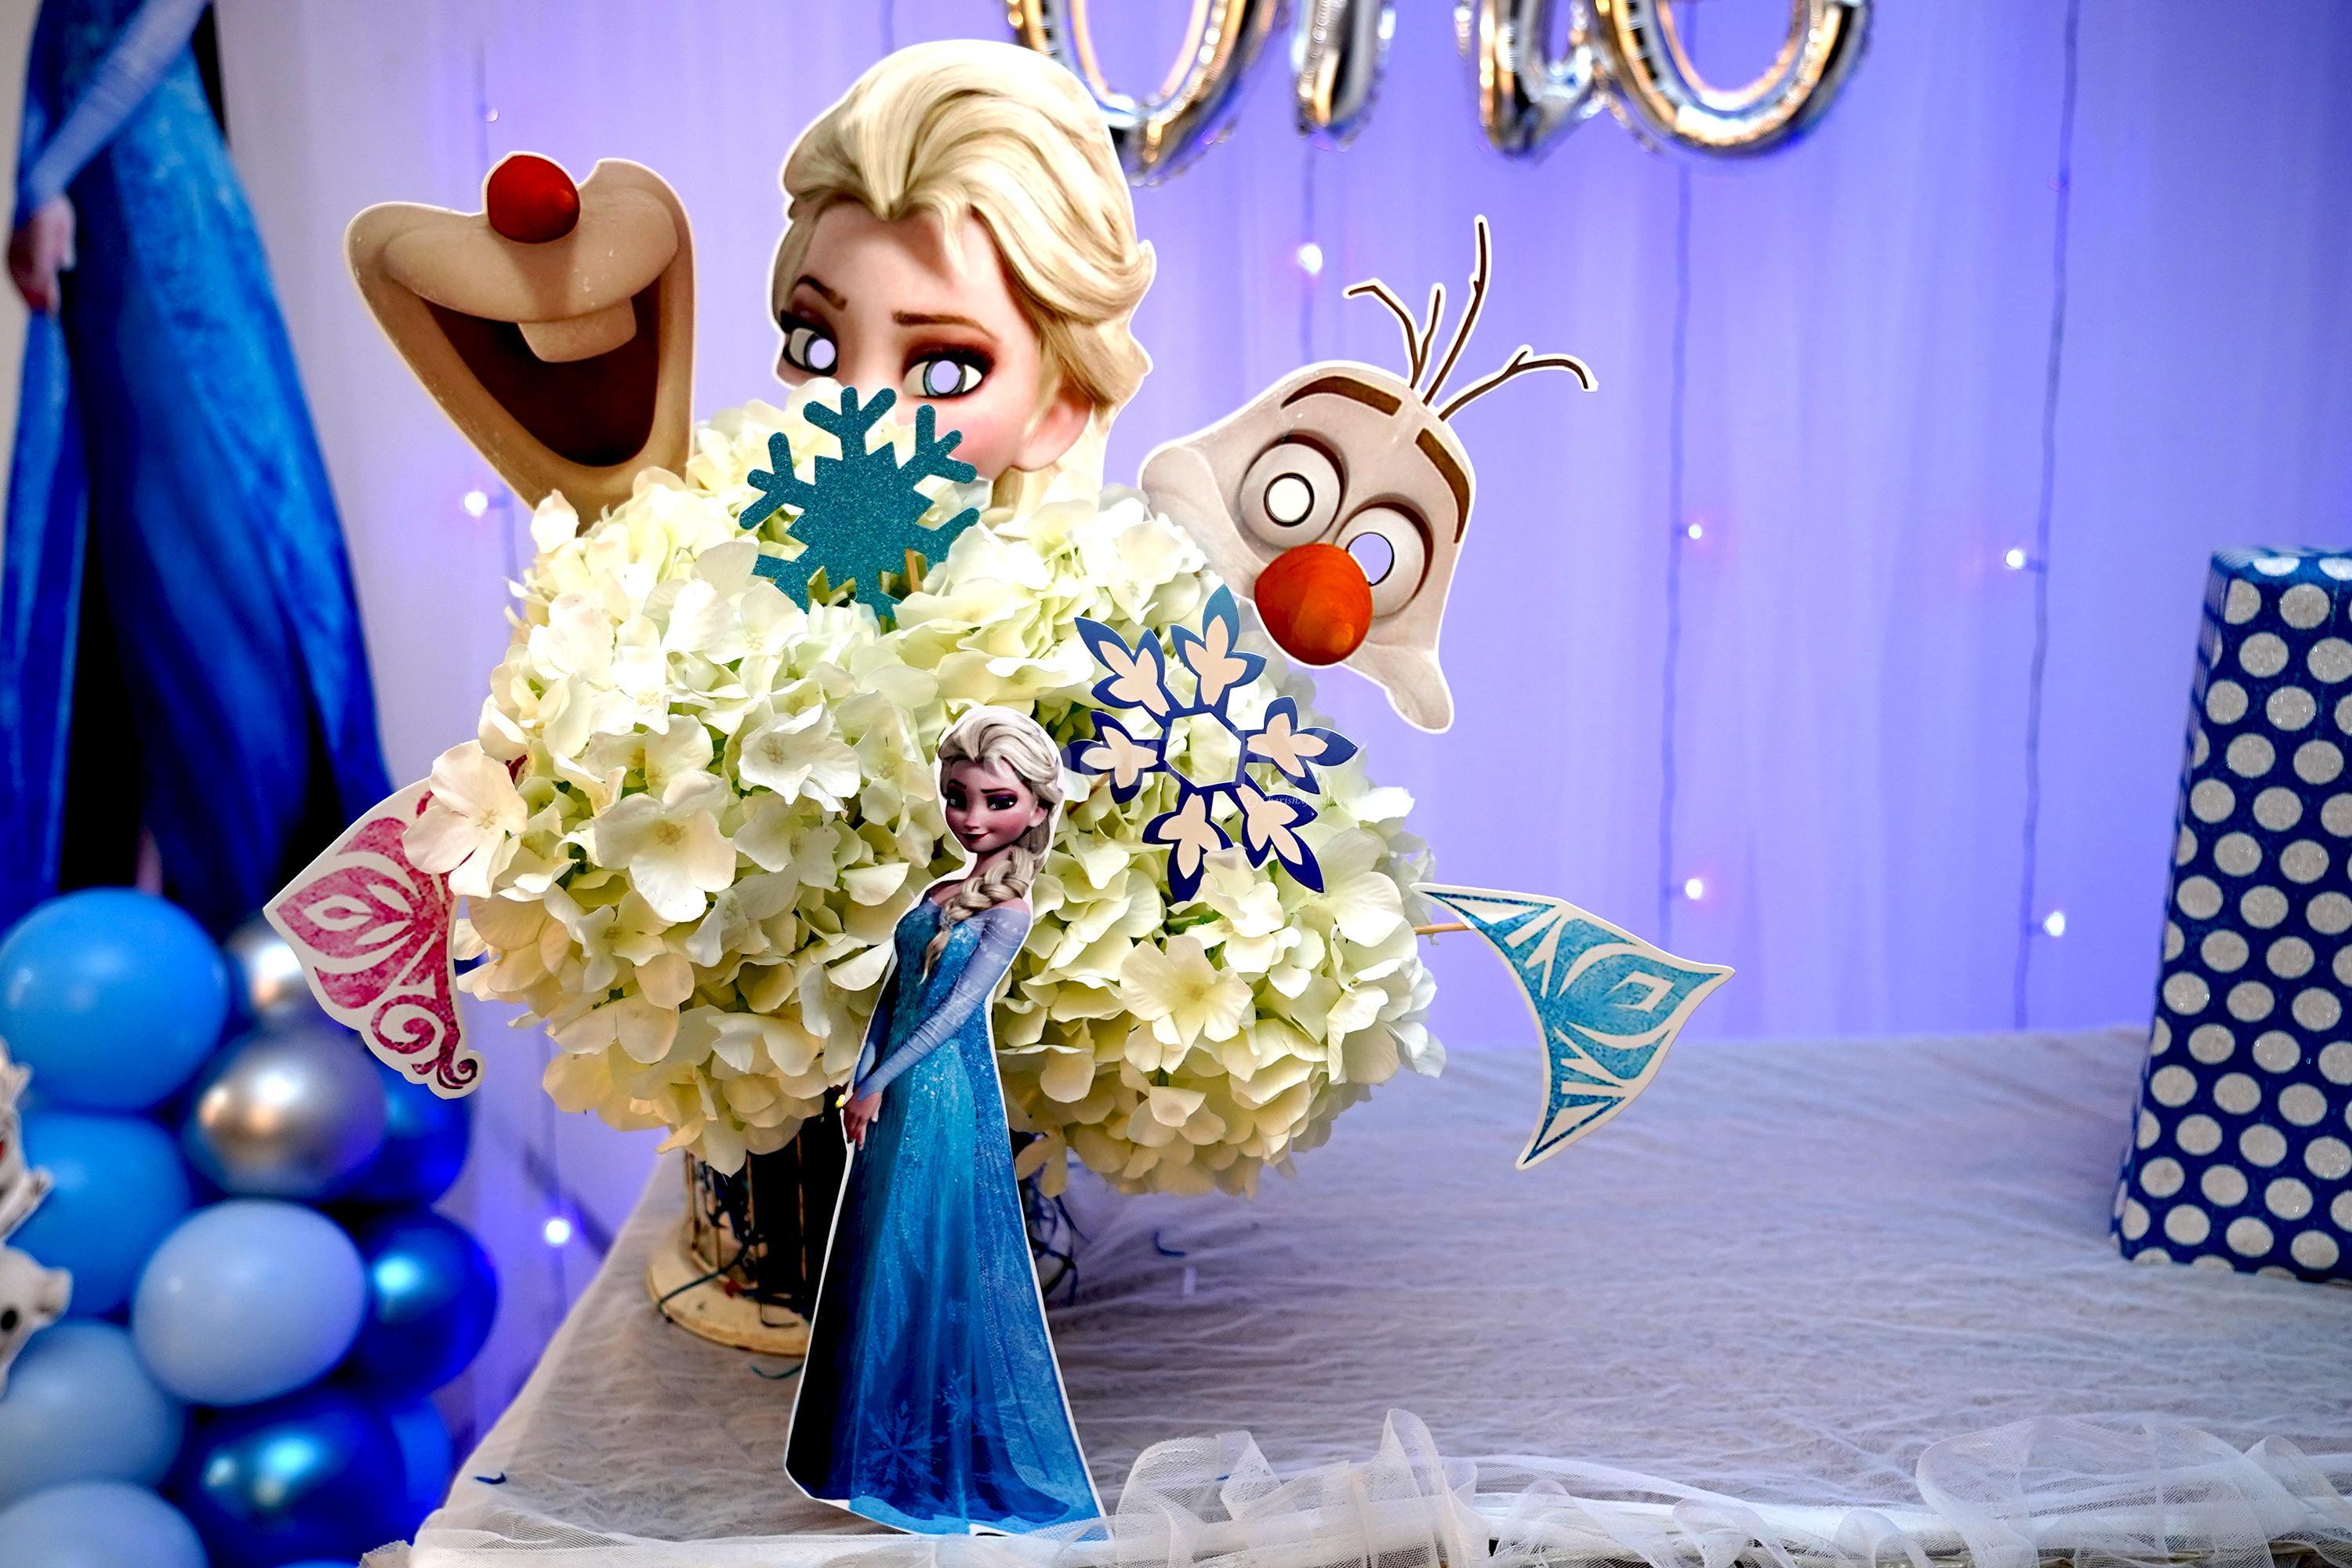 The Frozen Themed Decoration includes various character cut-outs such as Elsa, Anna and Olaf.